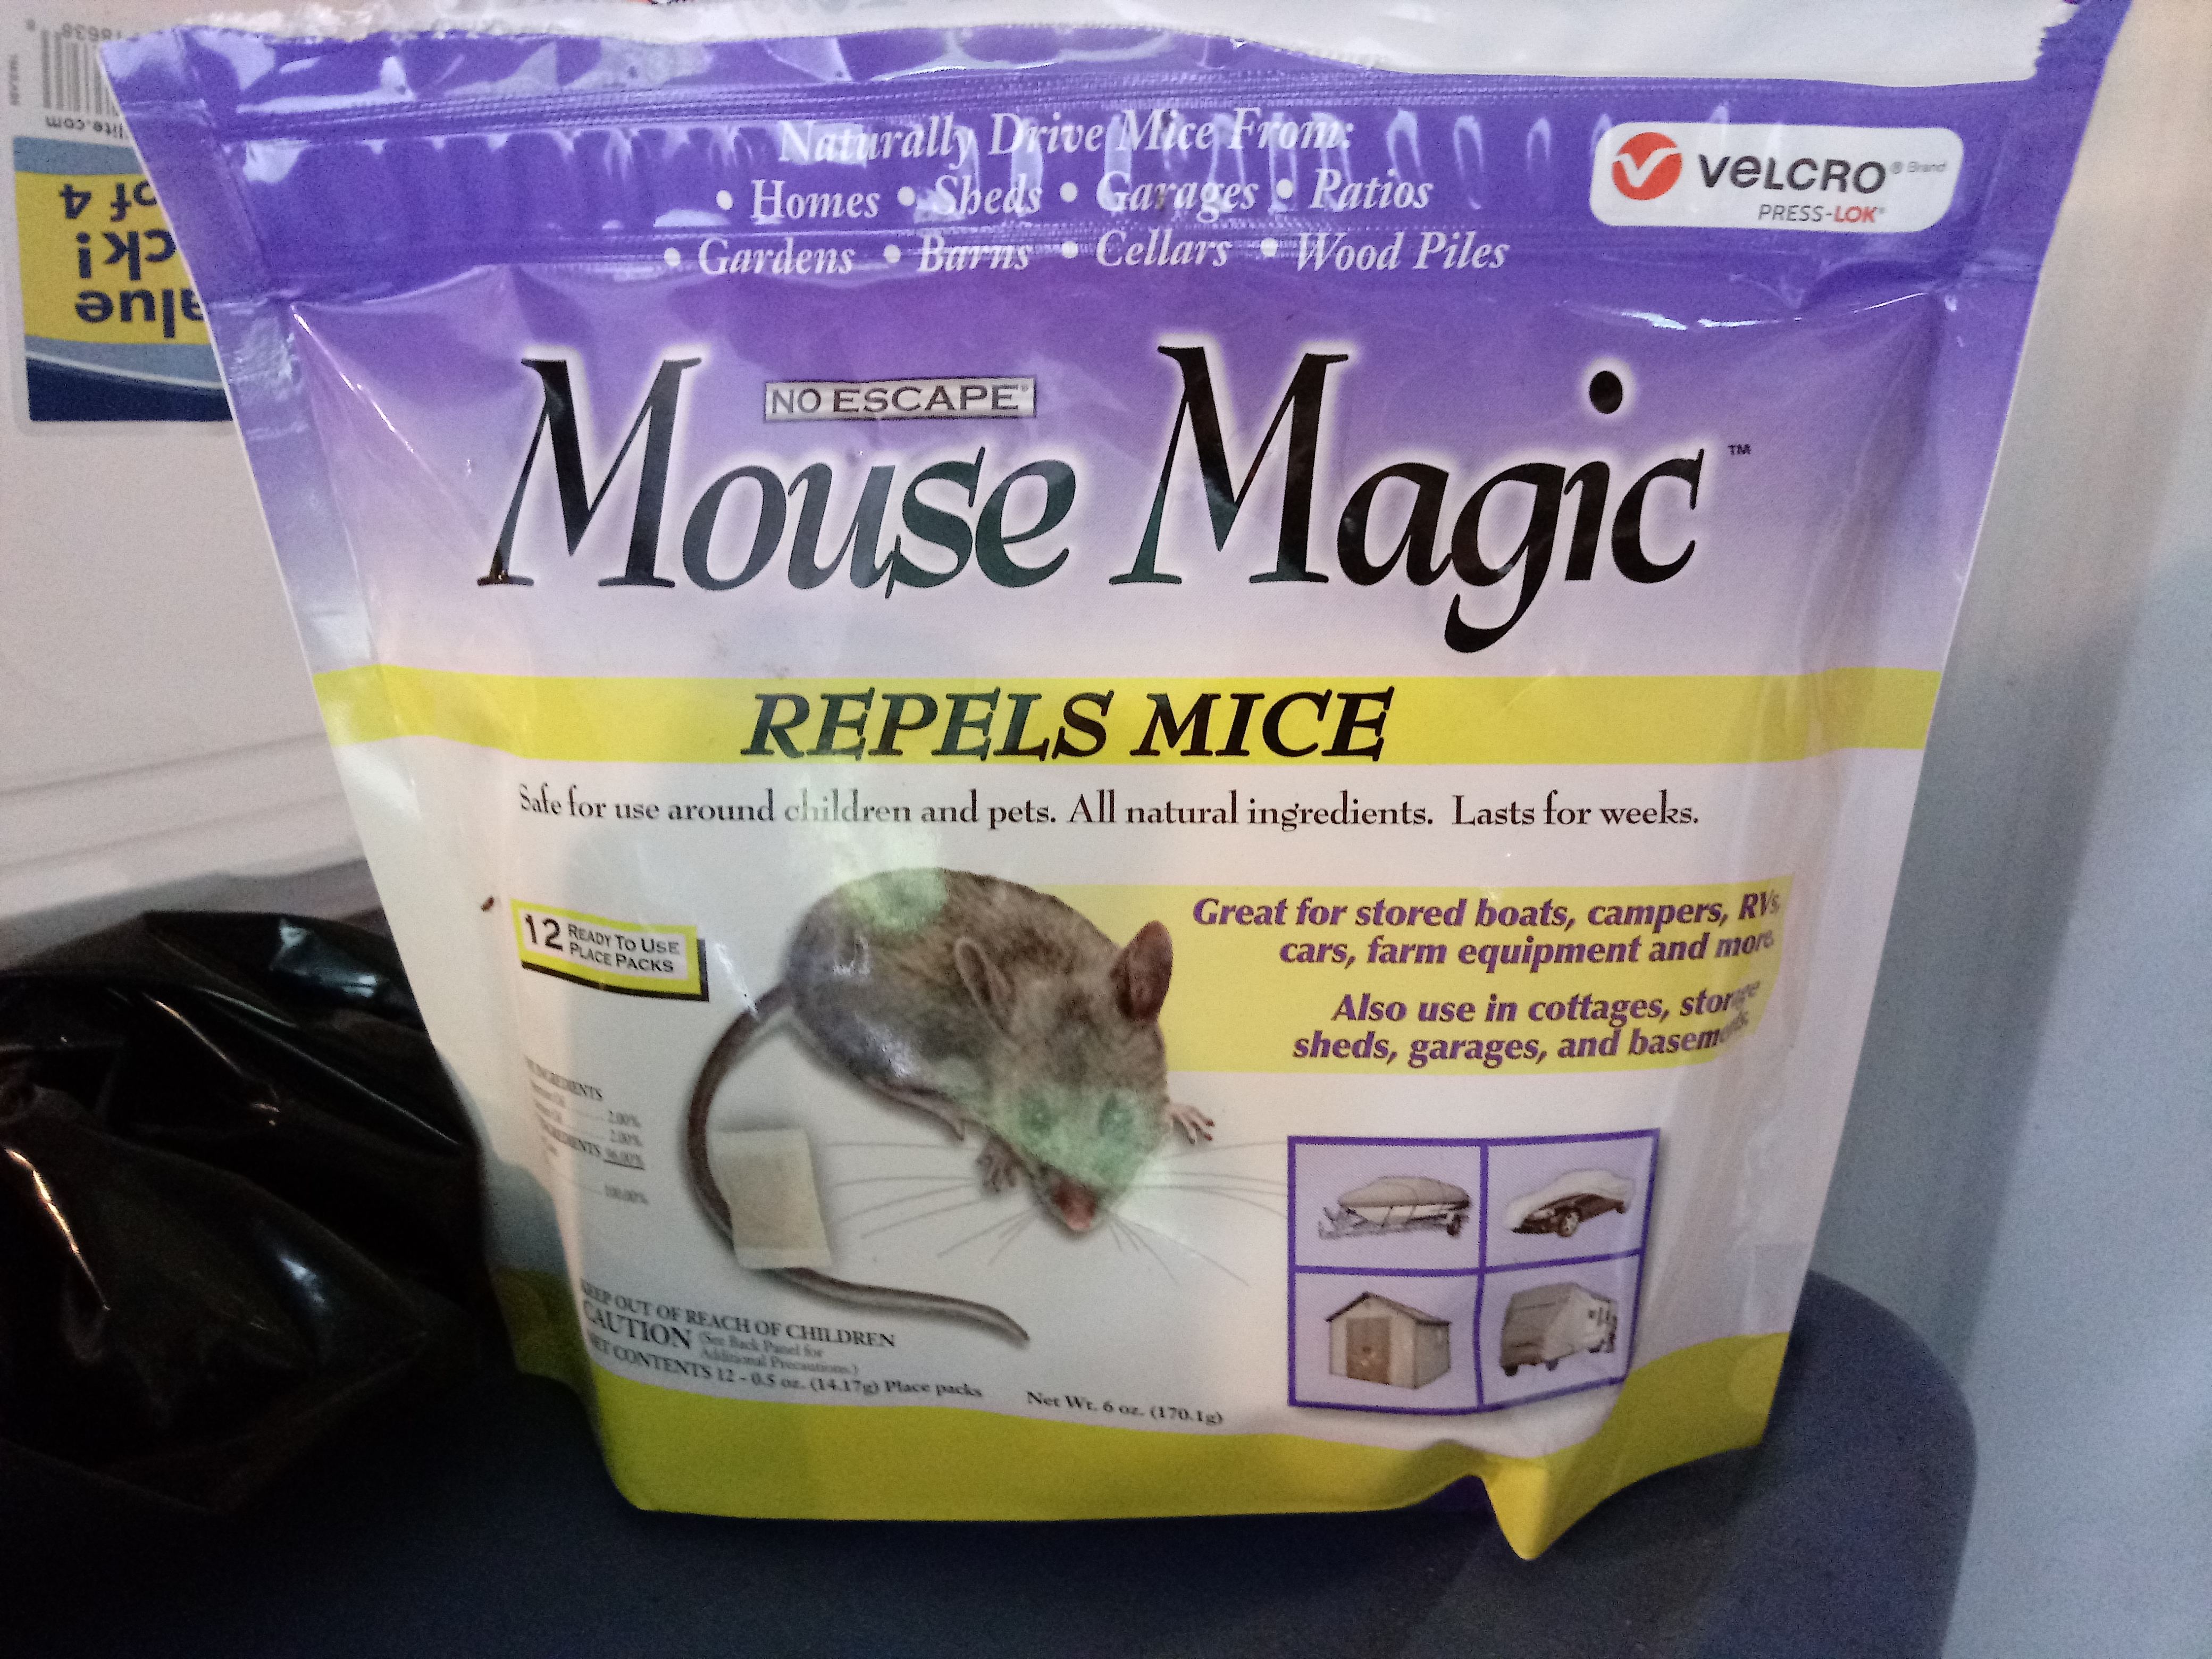 Do Dryer Sheets Keep Mice Away? DIY Rodent Deterrents